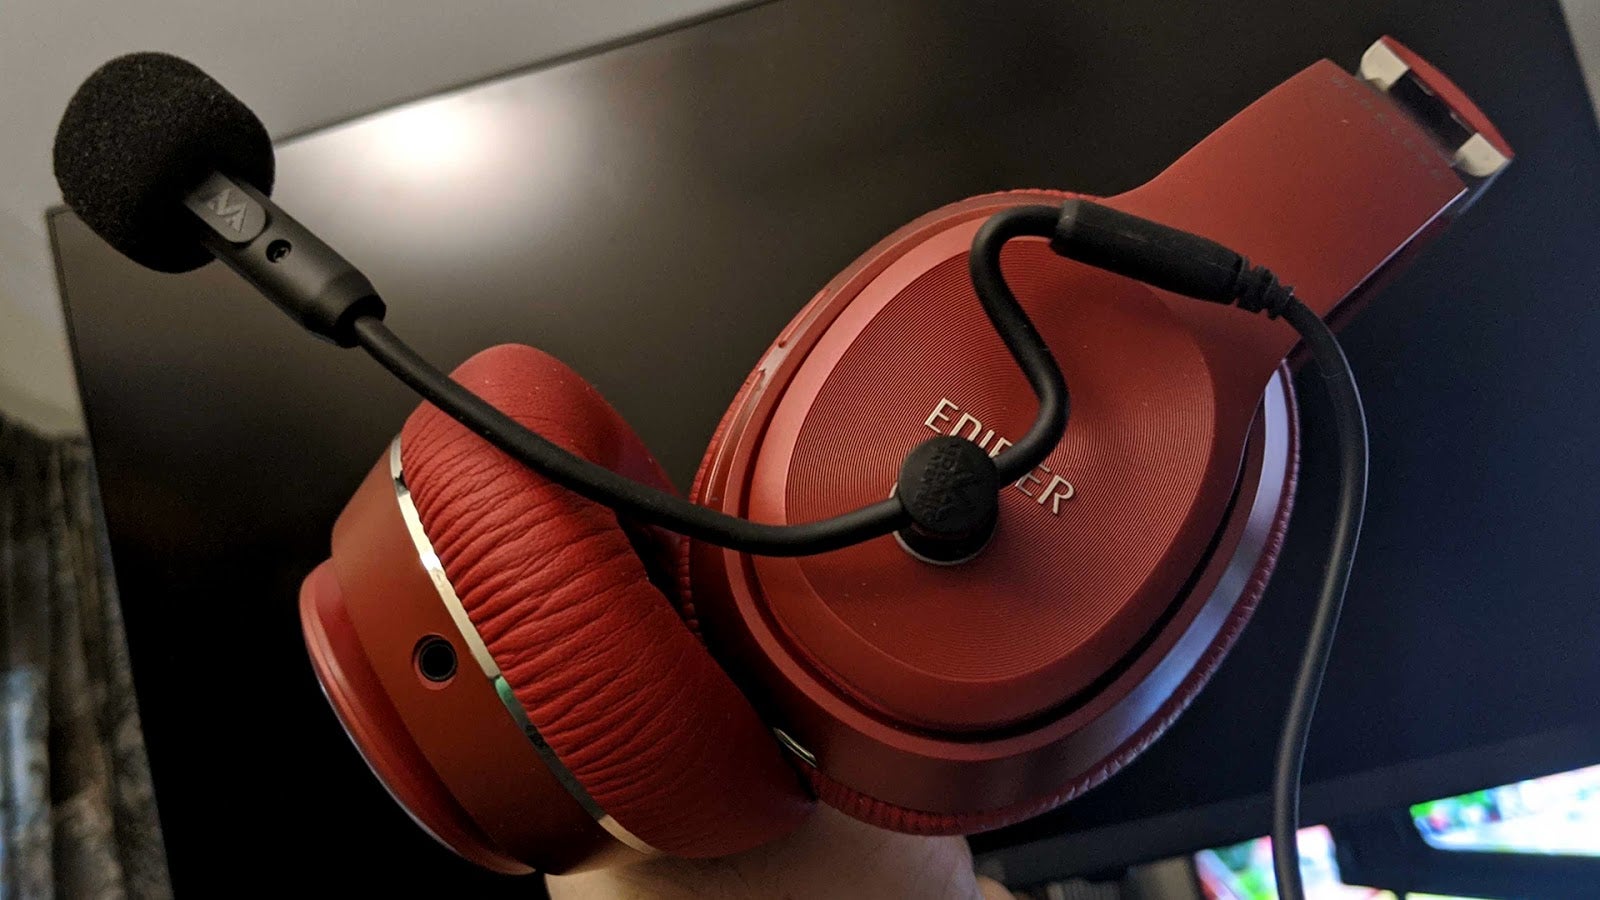 The Best Headset Microphones Can Attach To Any Headphones